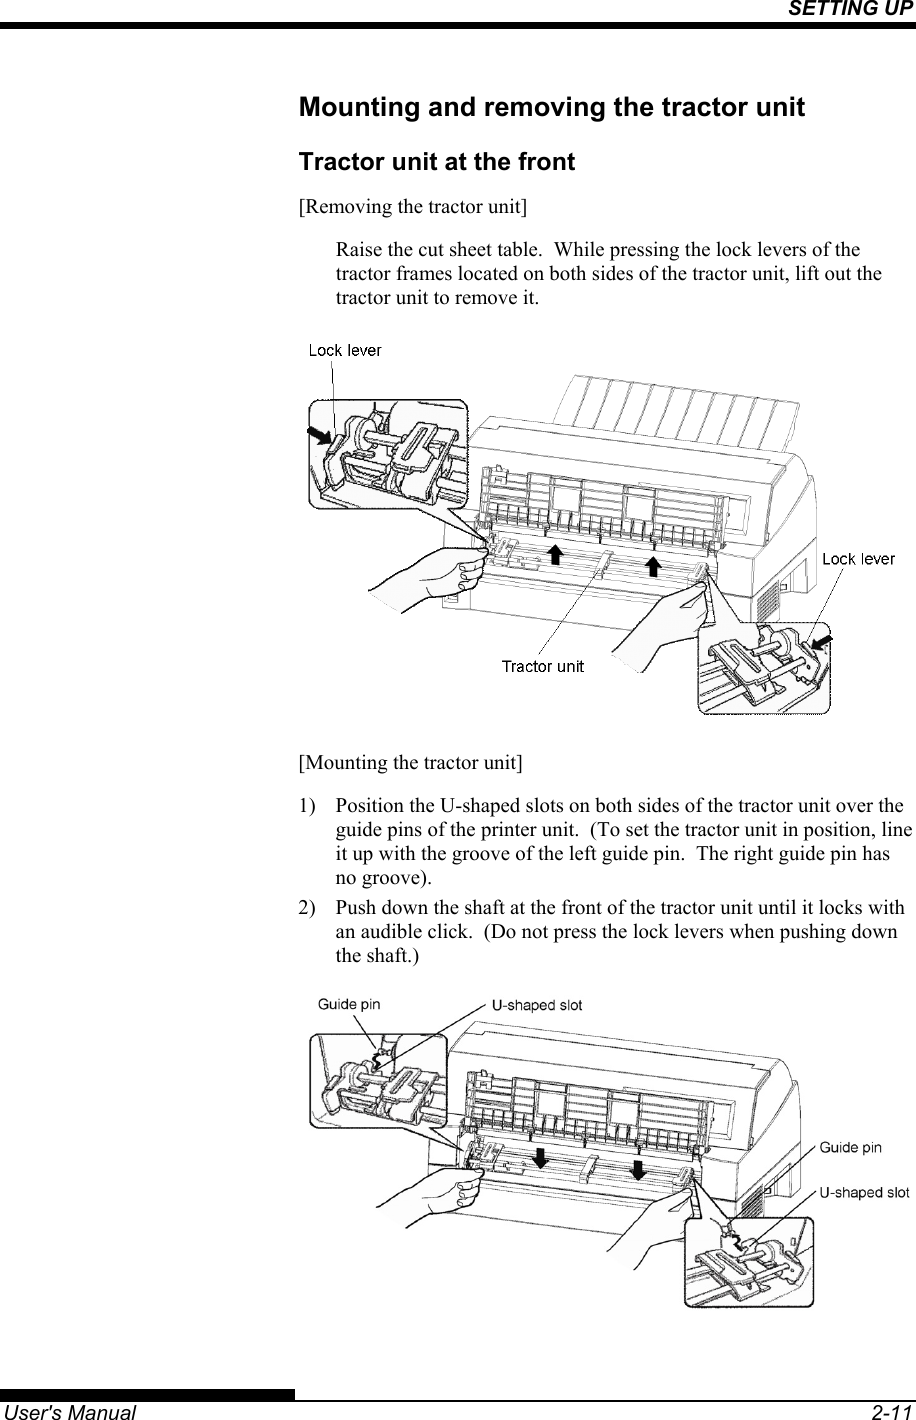 SETTING UP   User&apos;s Manual  2-11 Mounting and removing the tractor unit Tractor unit at the front [Removing the tractor unit] Raise the cut sheet table.  While pressing the lock levers of the tractor frames located on both sides of the tractor unit, lift out the tractor unit to remove it.  [Mounting the tractor unit] 1)  Position the U-shaped slots on both sides of the tractor unit over the guide pins of the printer unit.  (To set the tractor unit in position, line it up with the groove of the left guide pin.  The right guide pin has no groove). 2)  Push down the shaft at the front of the tractor unit until it locks with an audible click.  (Do not press the lock levers when pushing down the shaft.)  